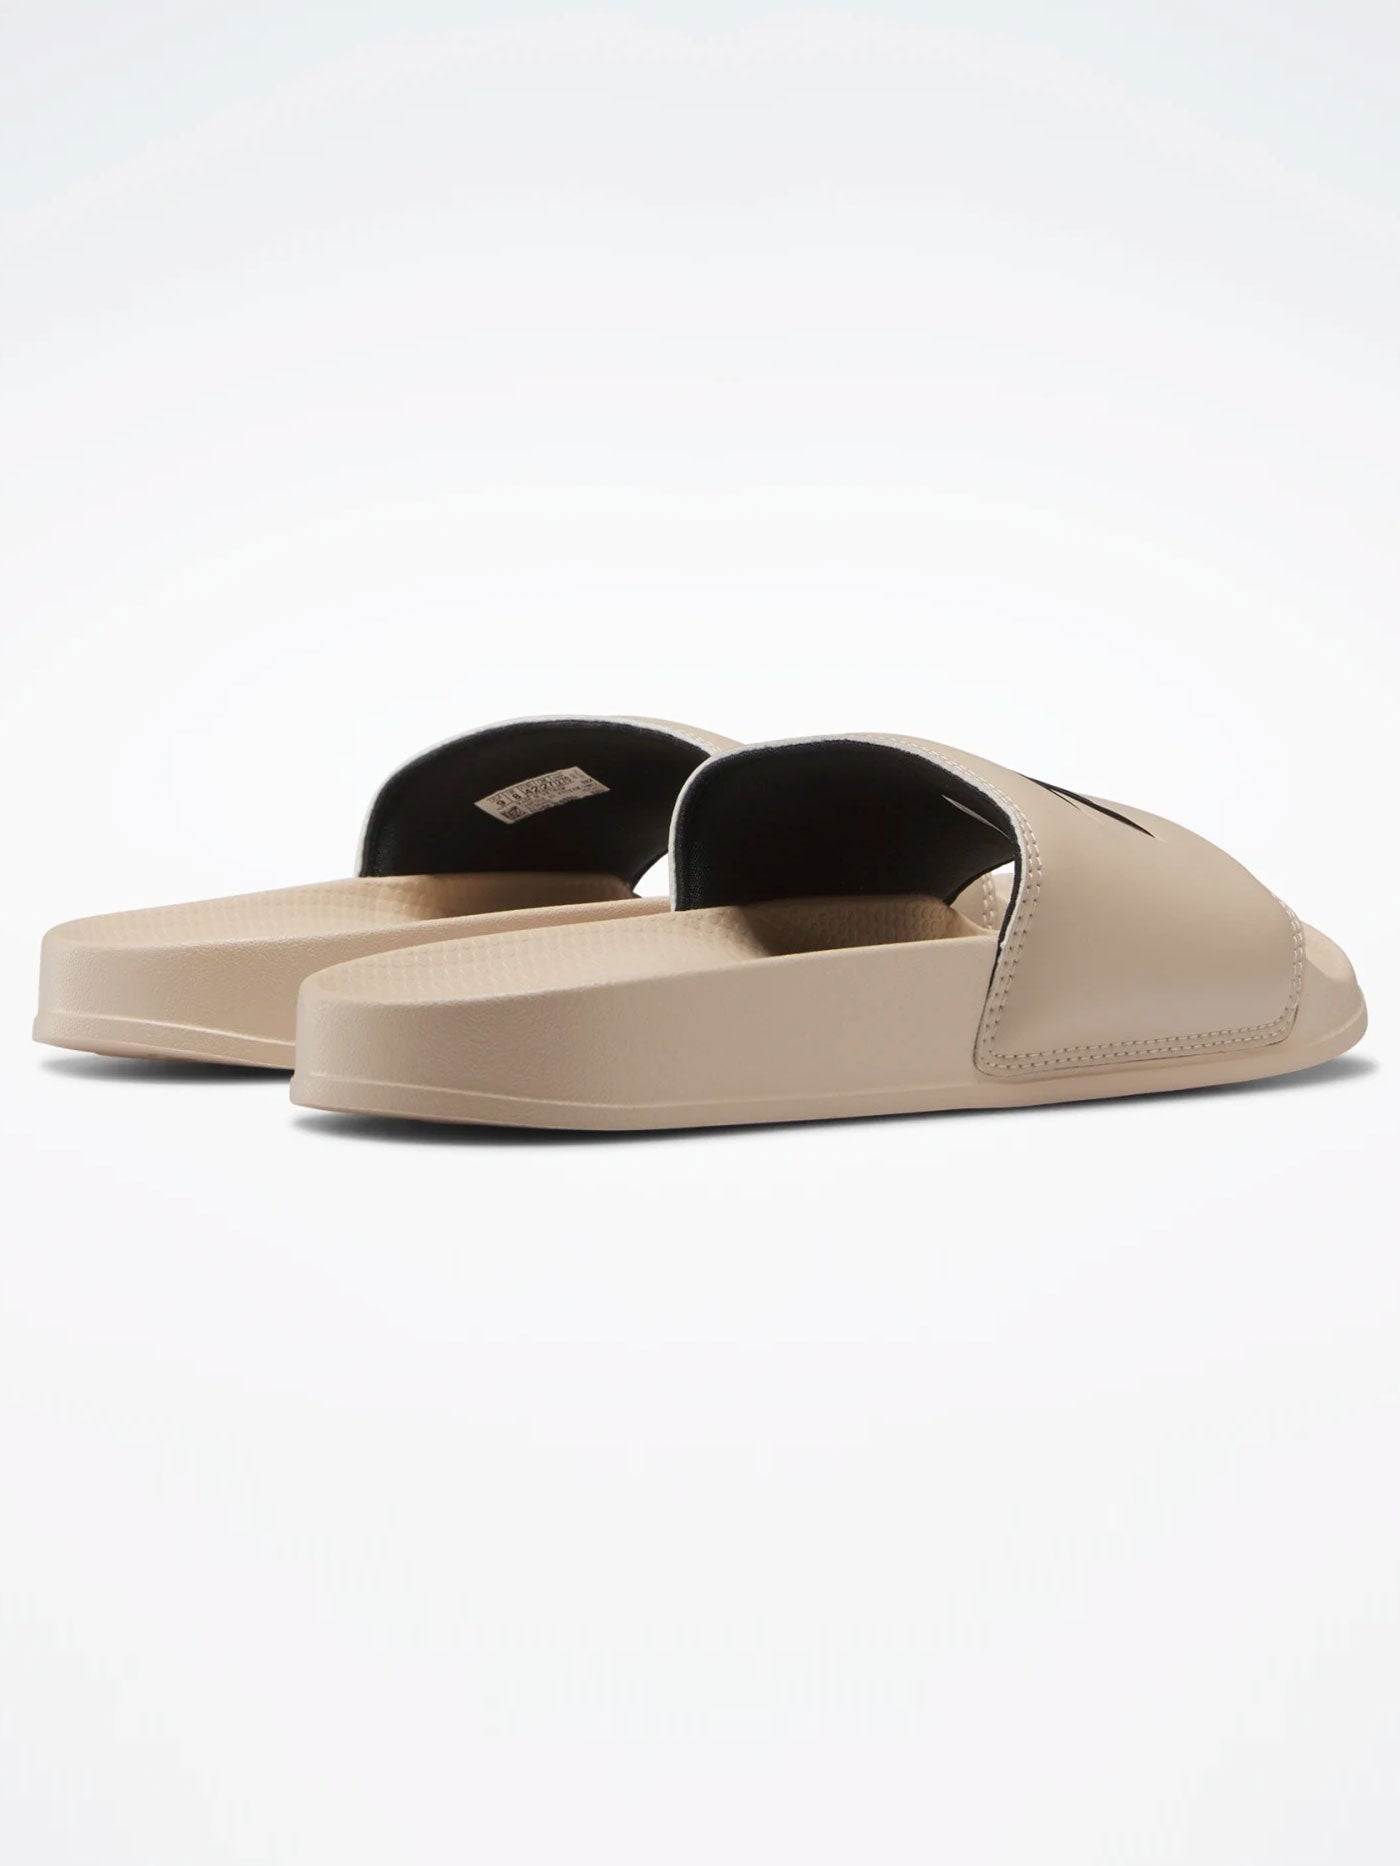 Reebok Spring 2023 Classic Slide Taupe Sandals